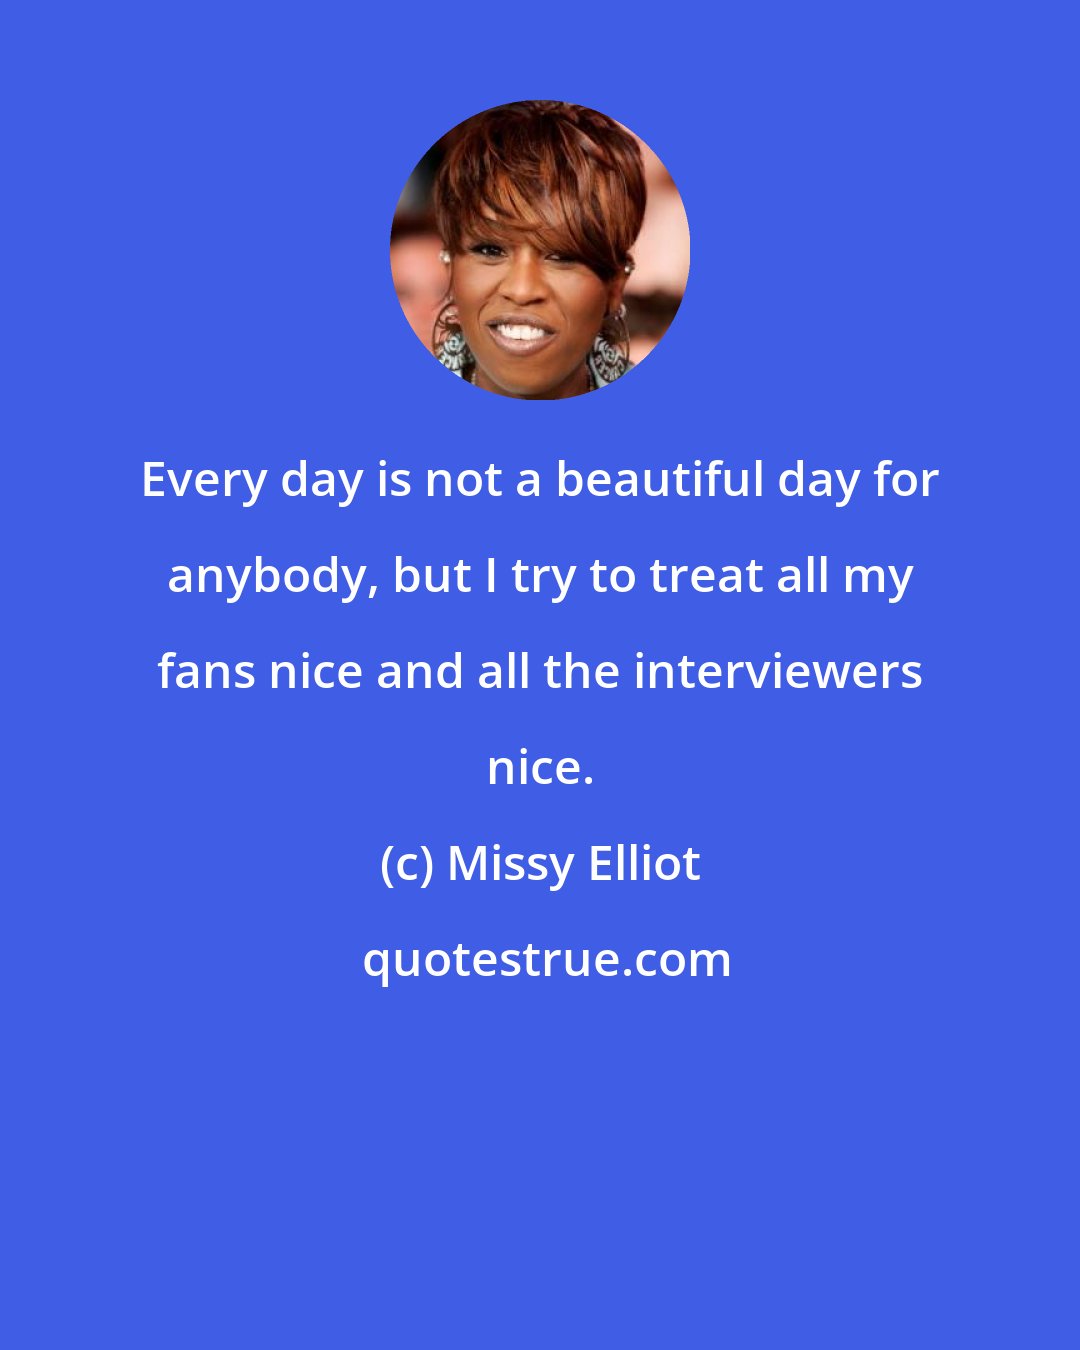 Missy Elliot: Every day is not a beautiful day for anybody, but I try to treat all my fans nice and all the interviewers nice.